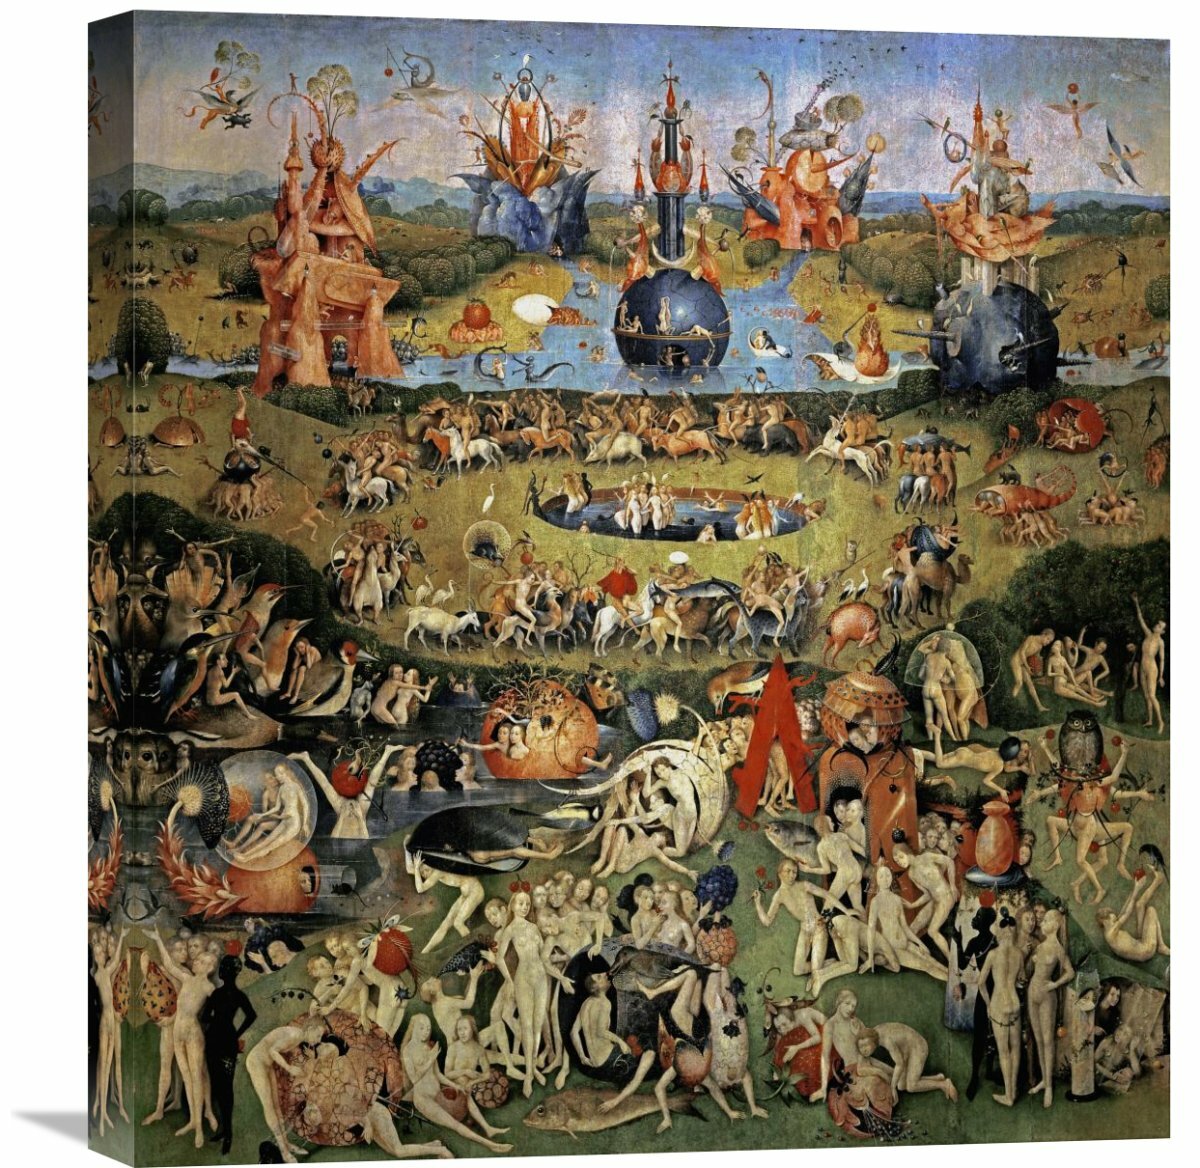 Global Gallery The Garden Of Earthly Delights Center Panel By